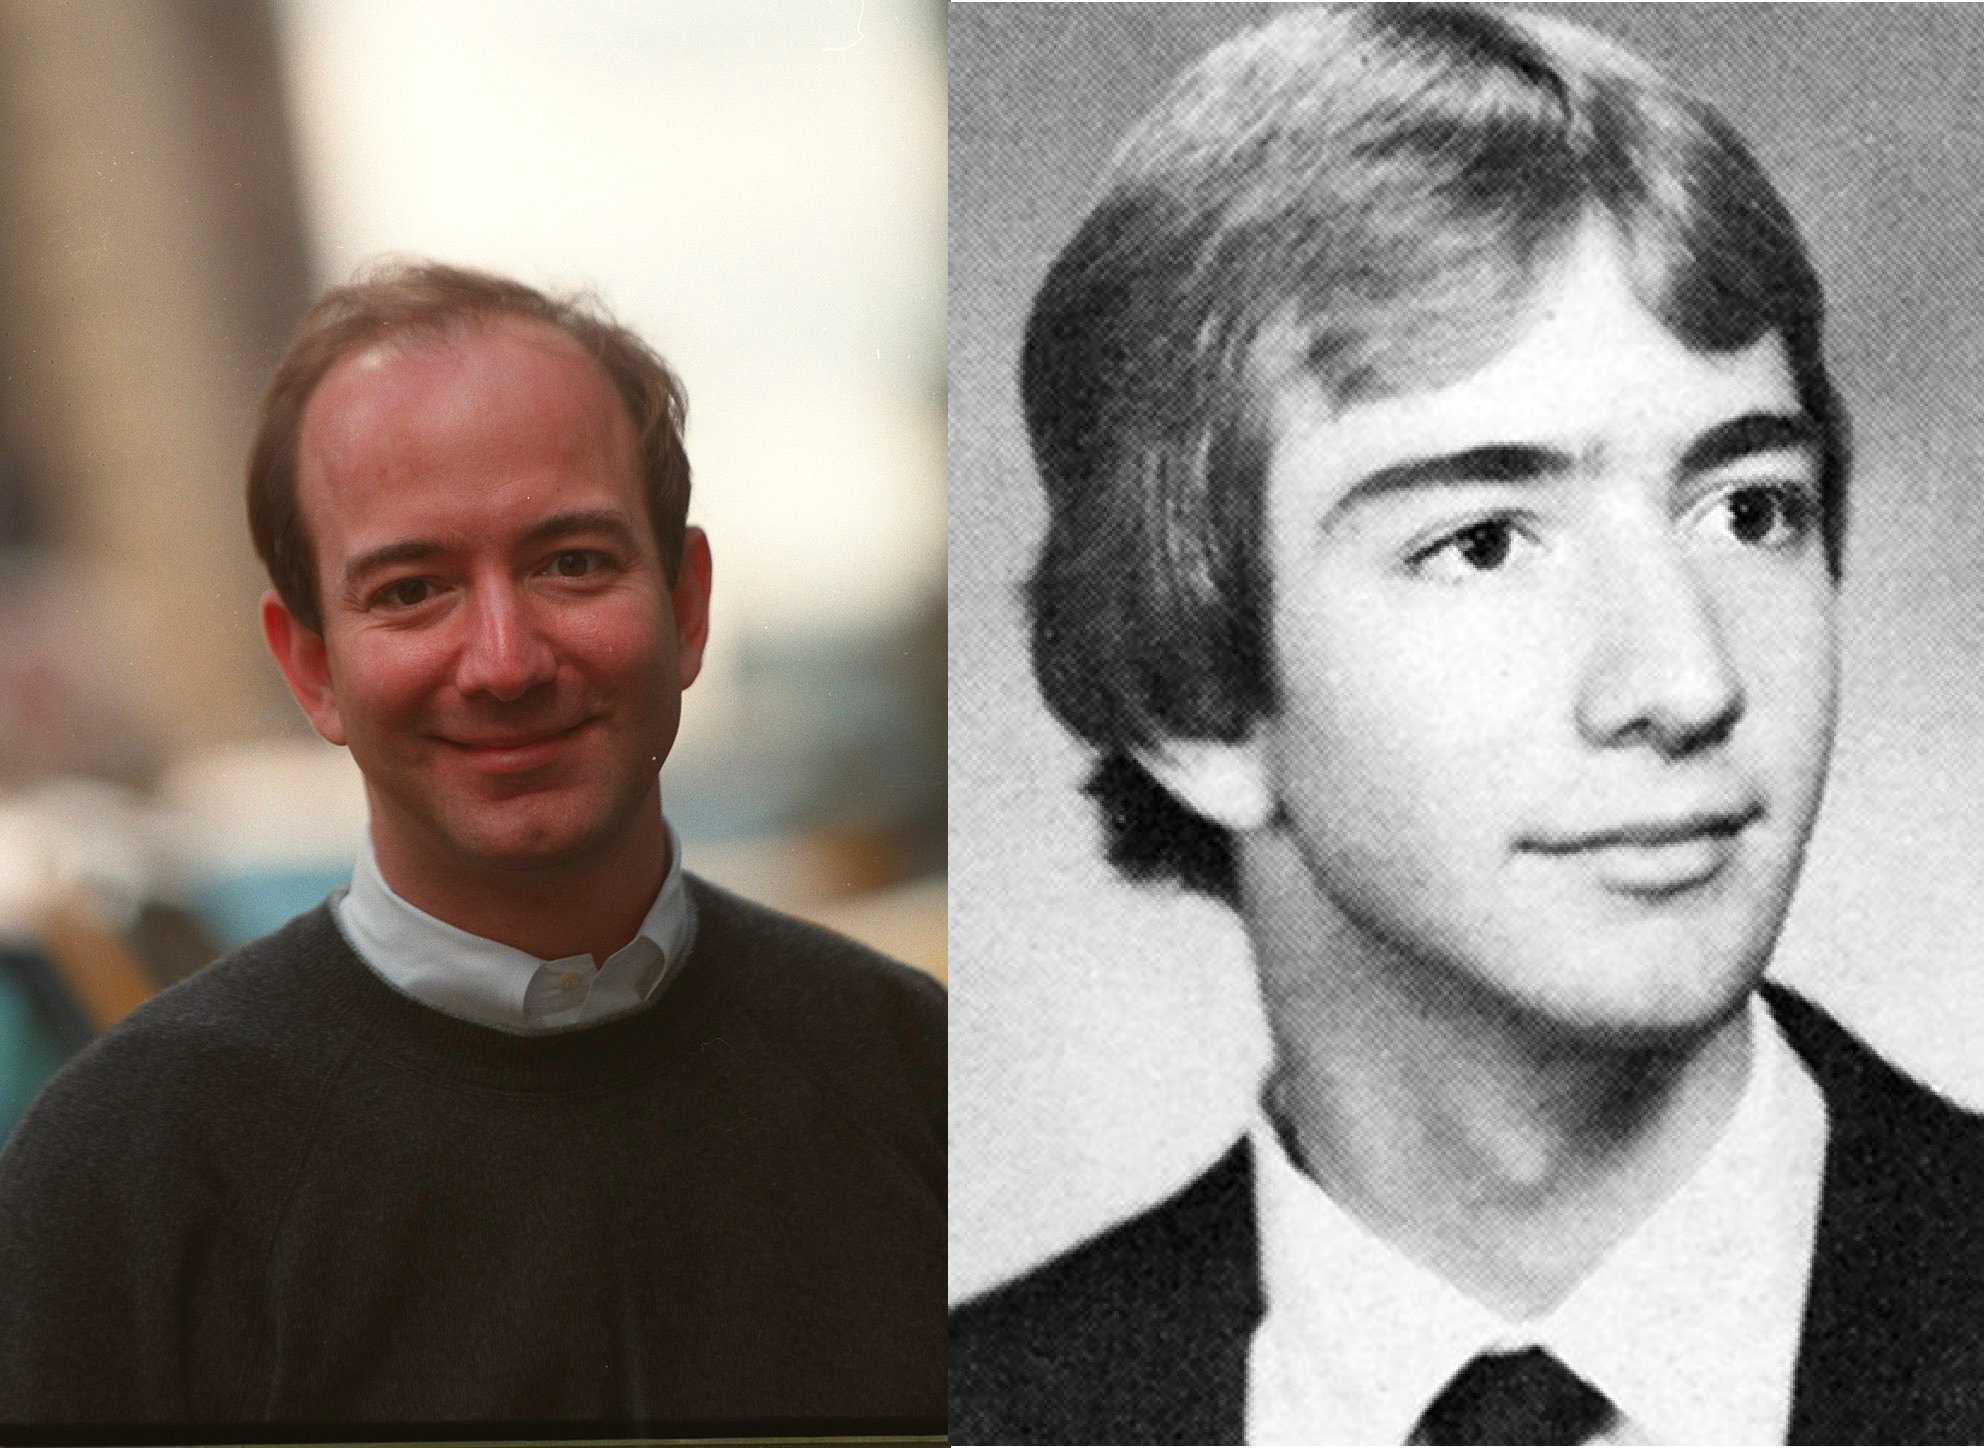 Jeff Bezos with hair archive photos